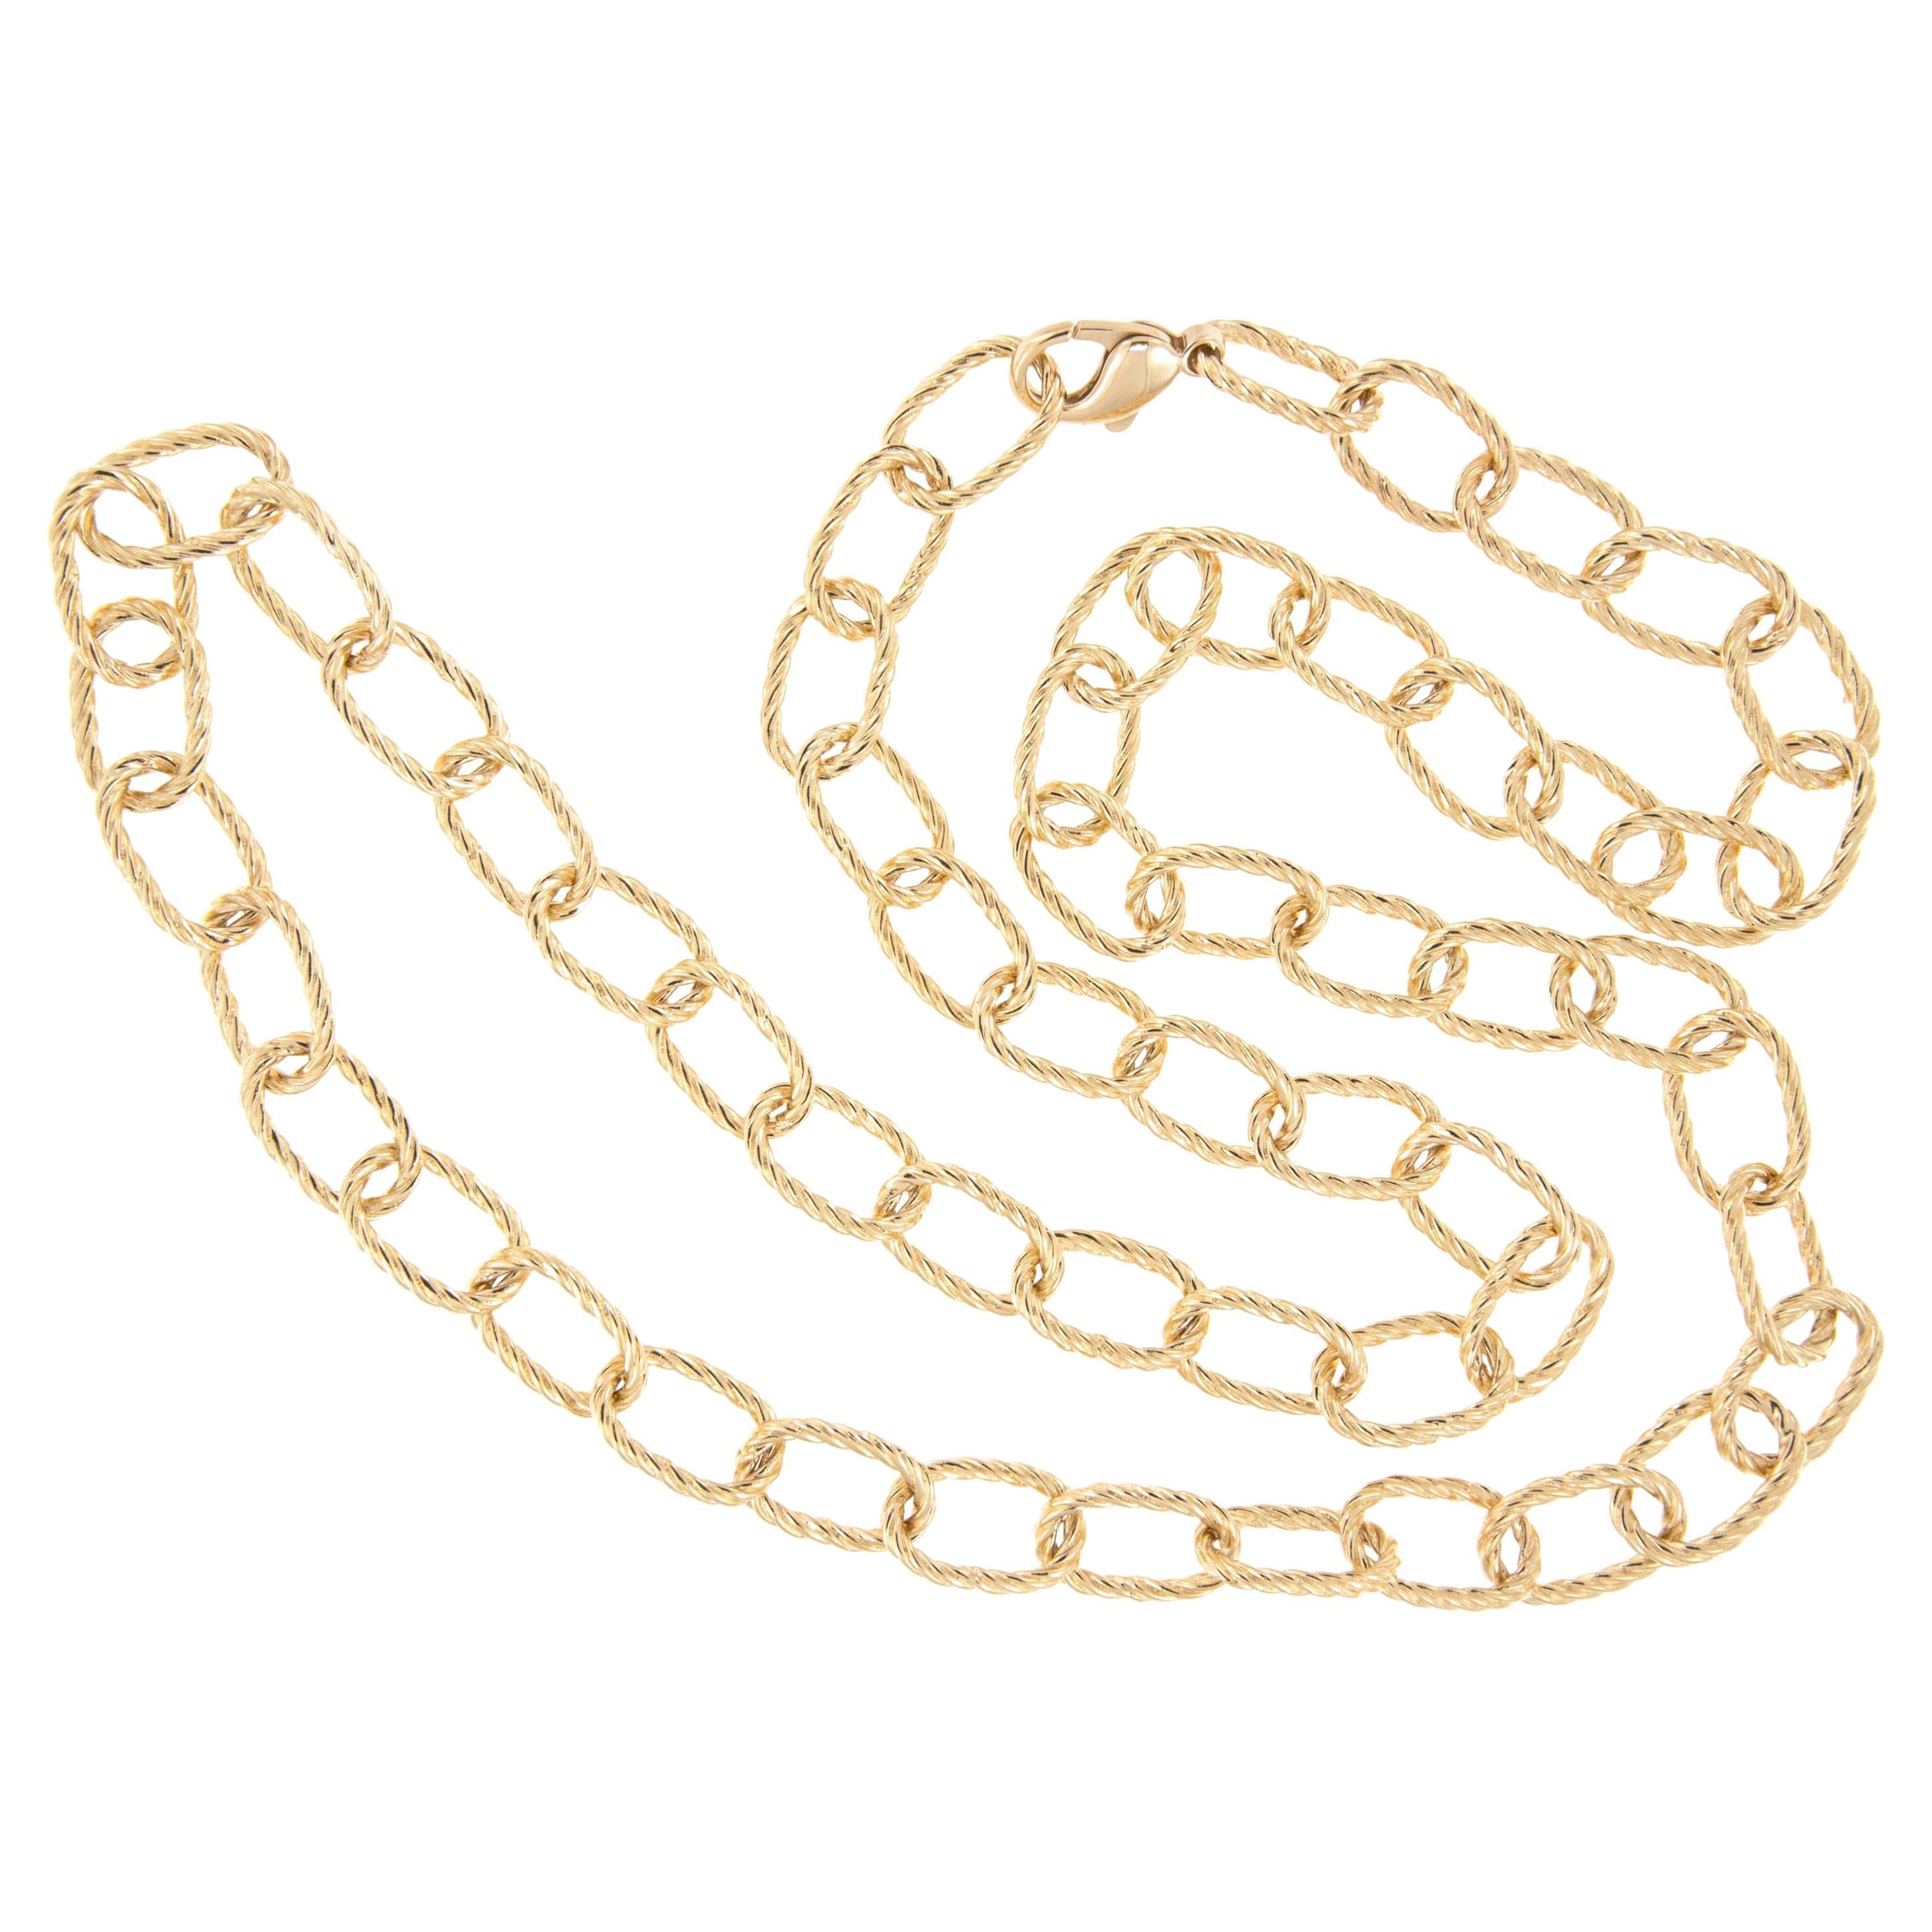 Solid 14 Karat Yellow Gold 31" Long Twisted Oval Link Necklace For Sale